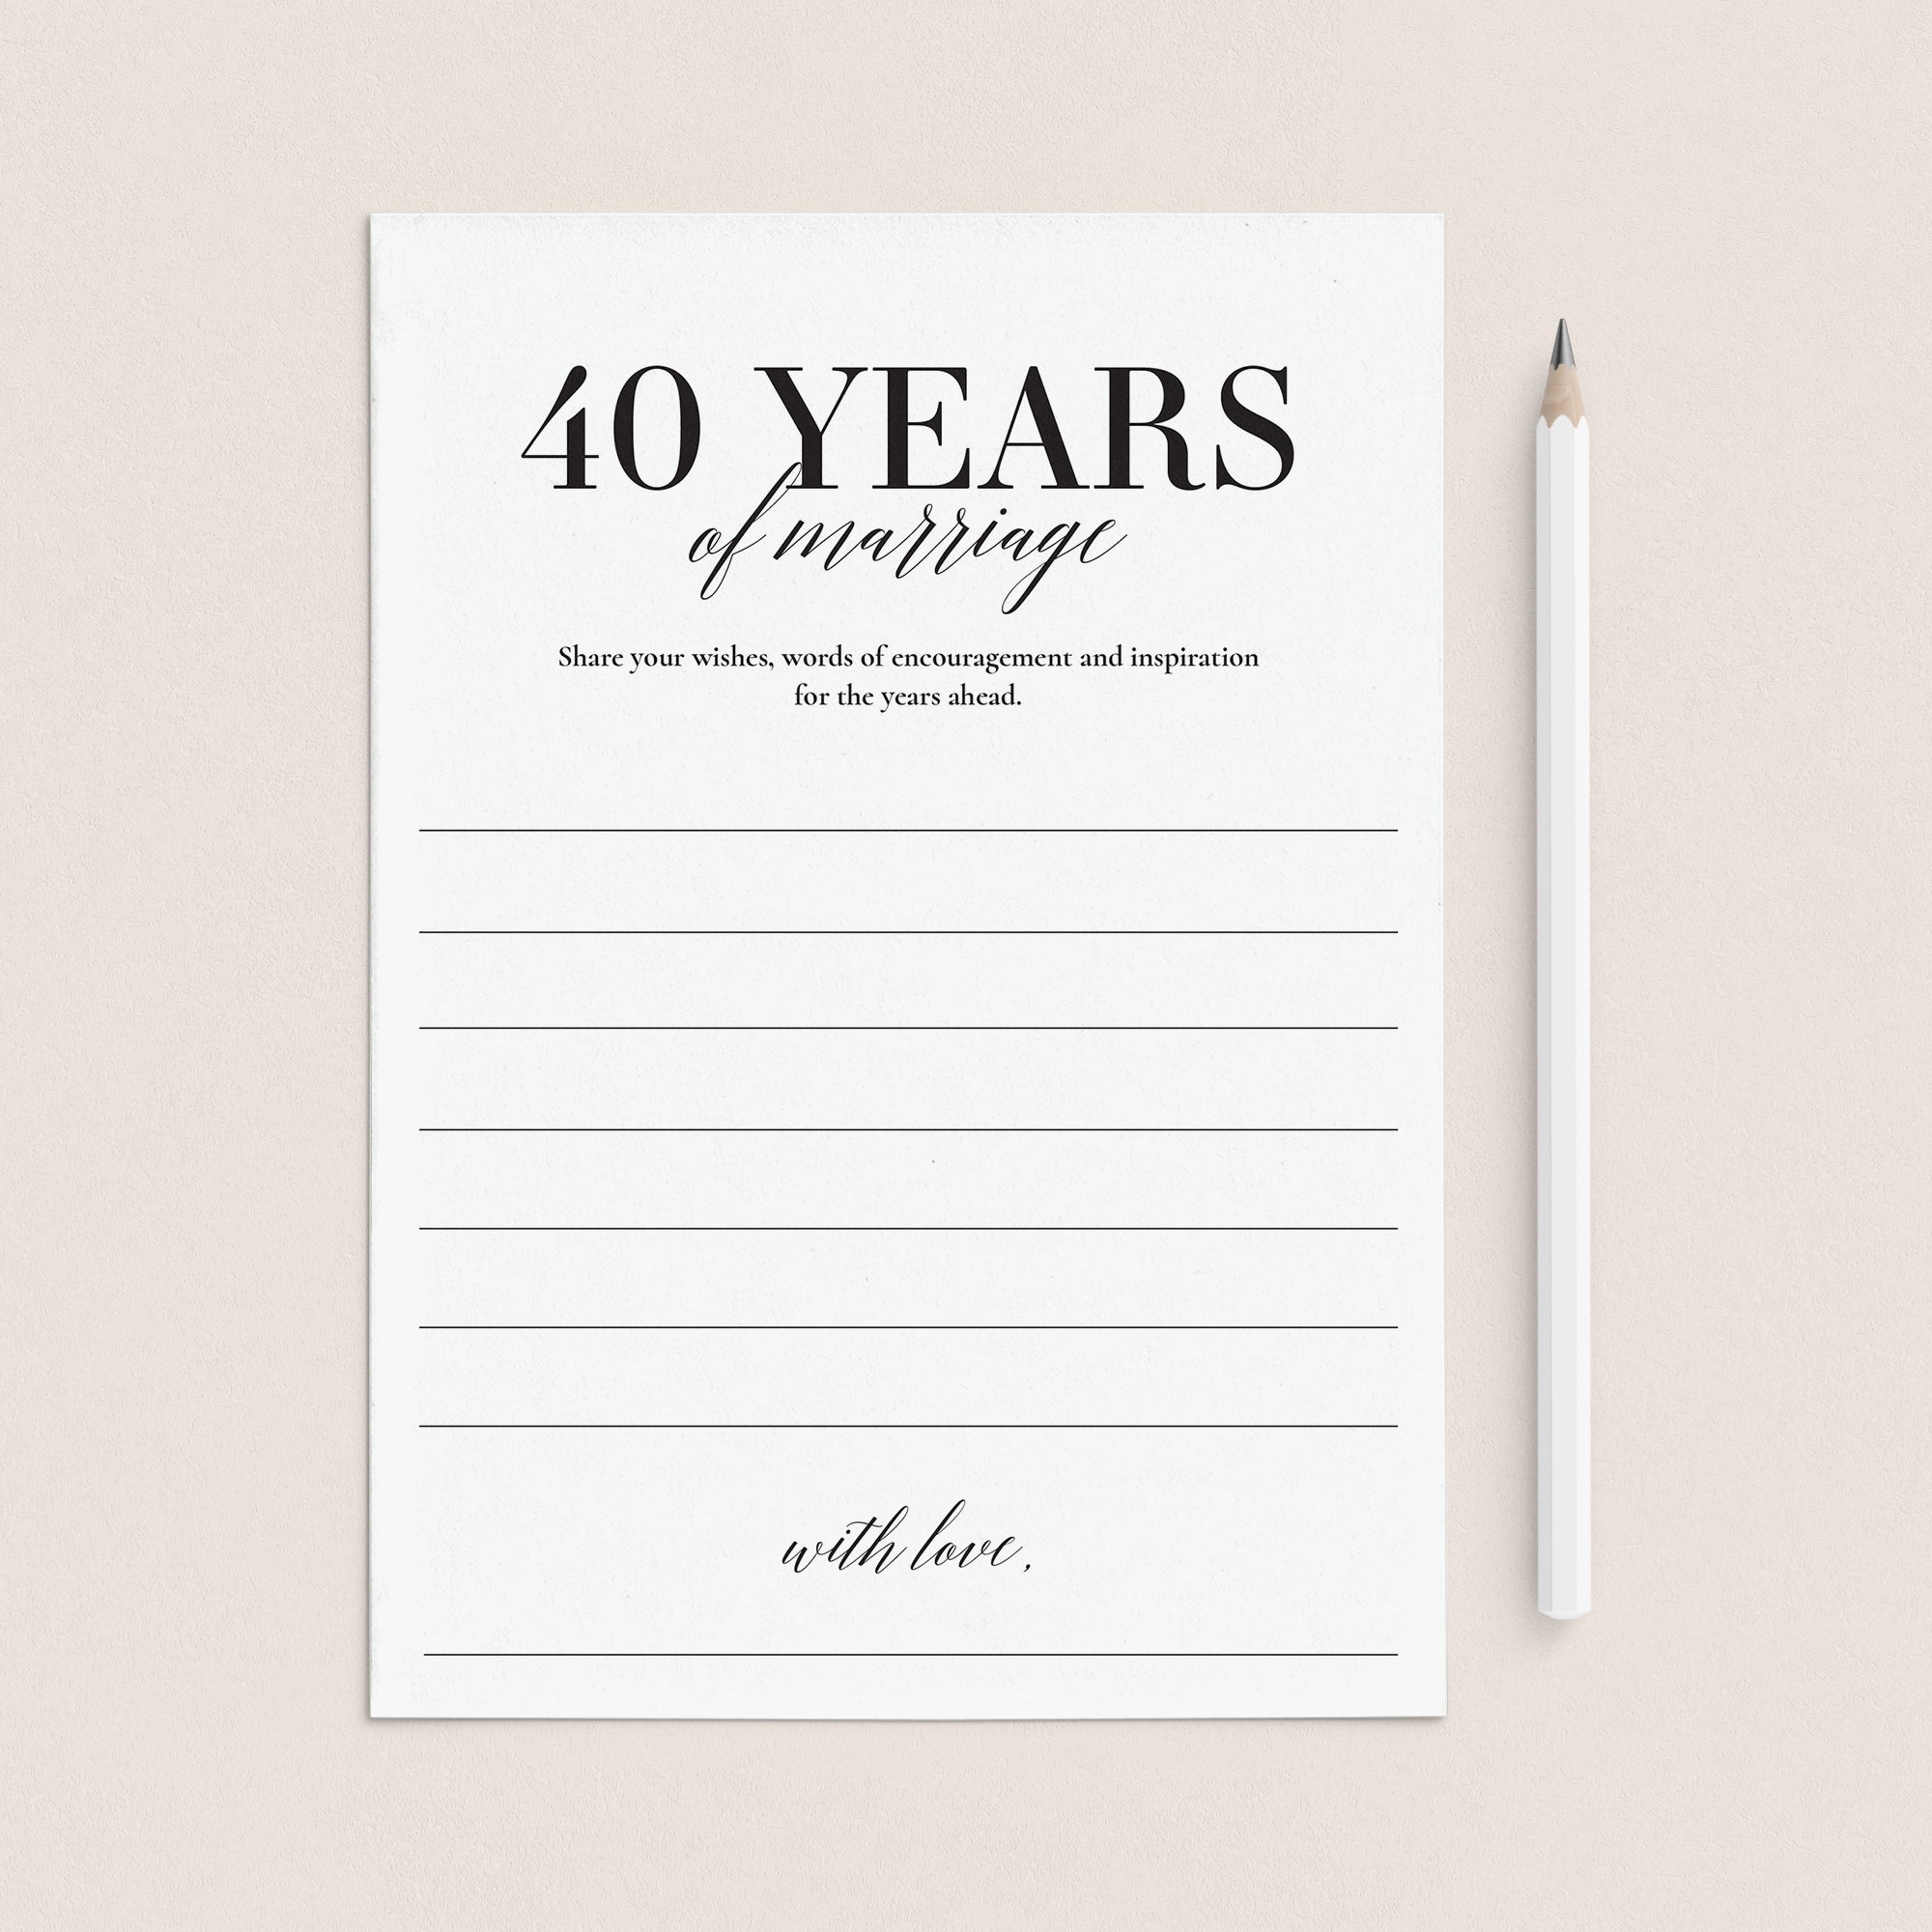 40th Wedding Anniversary Wishes & Advice Card Printable by LittleSizzle